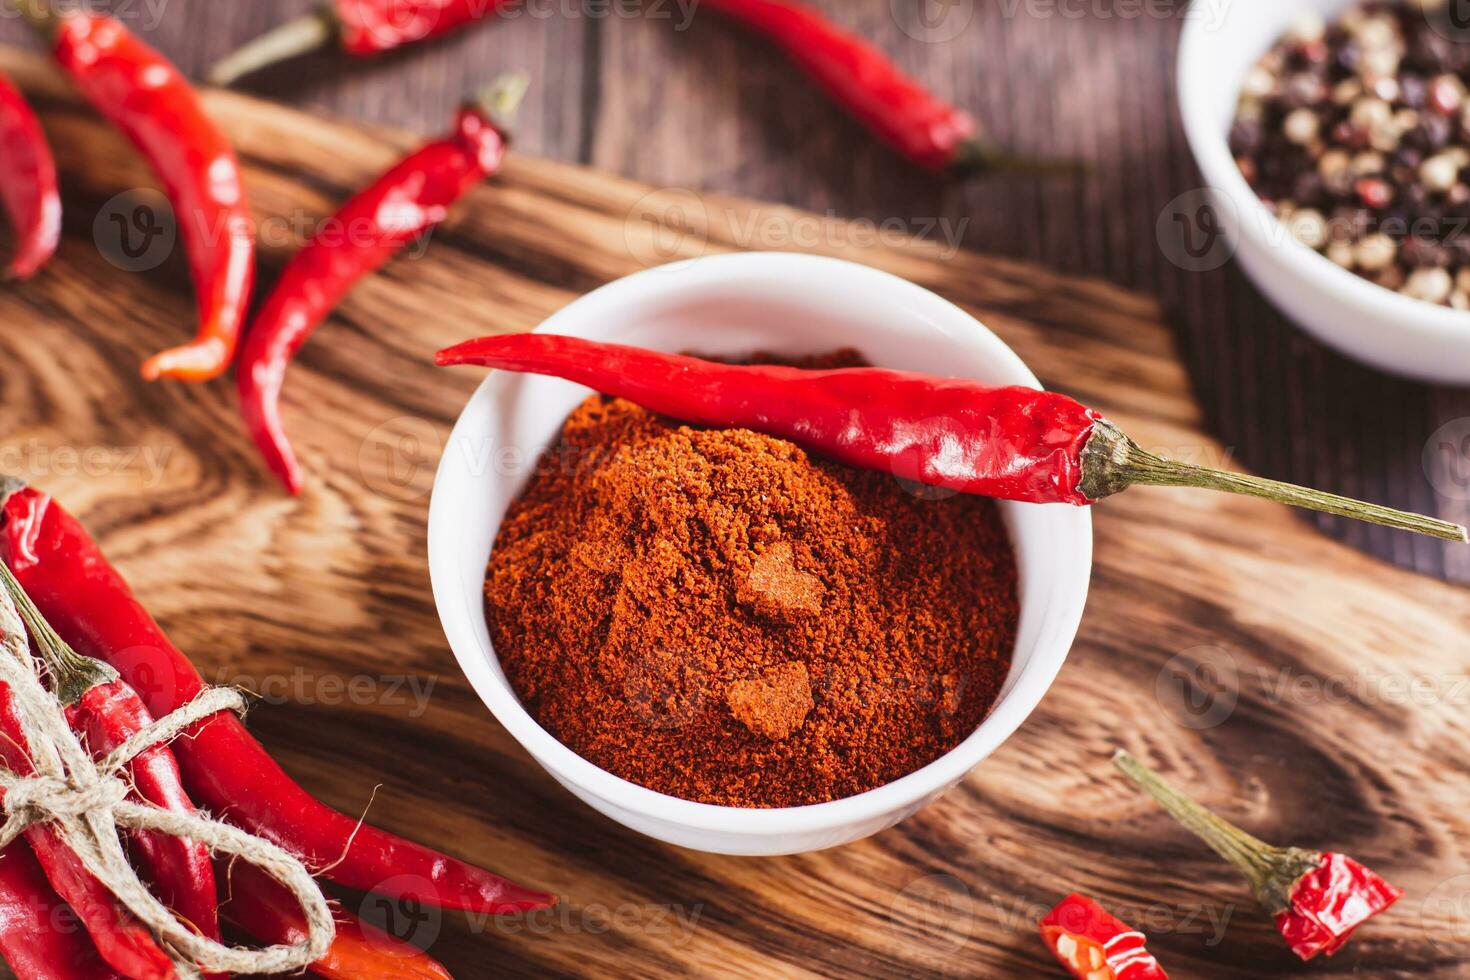 Red raw hot peppers on a bowl with paprika on a wooden background close-up photo